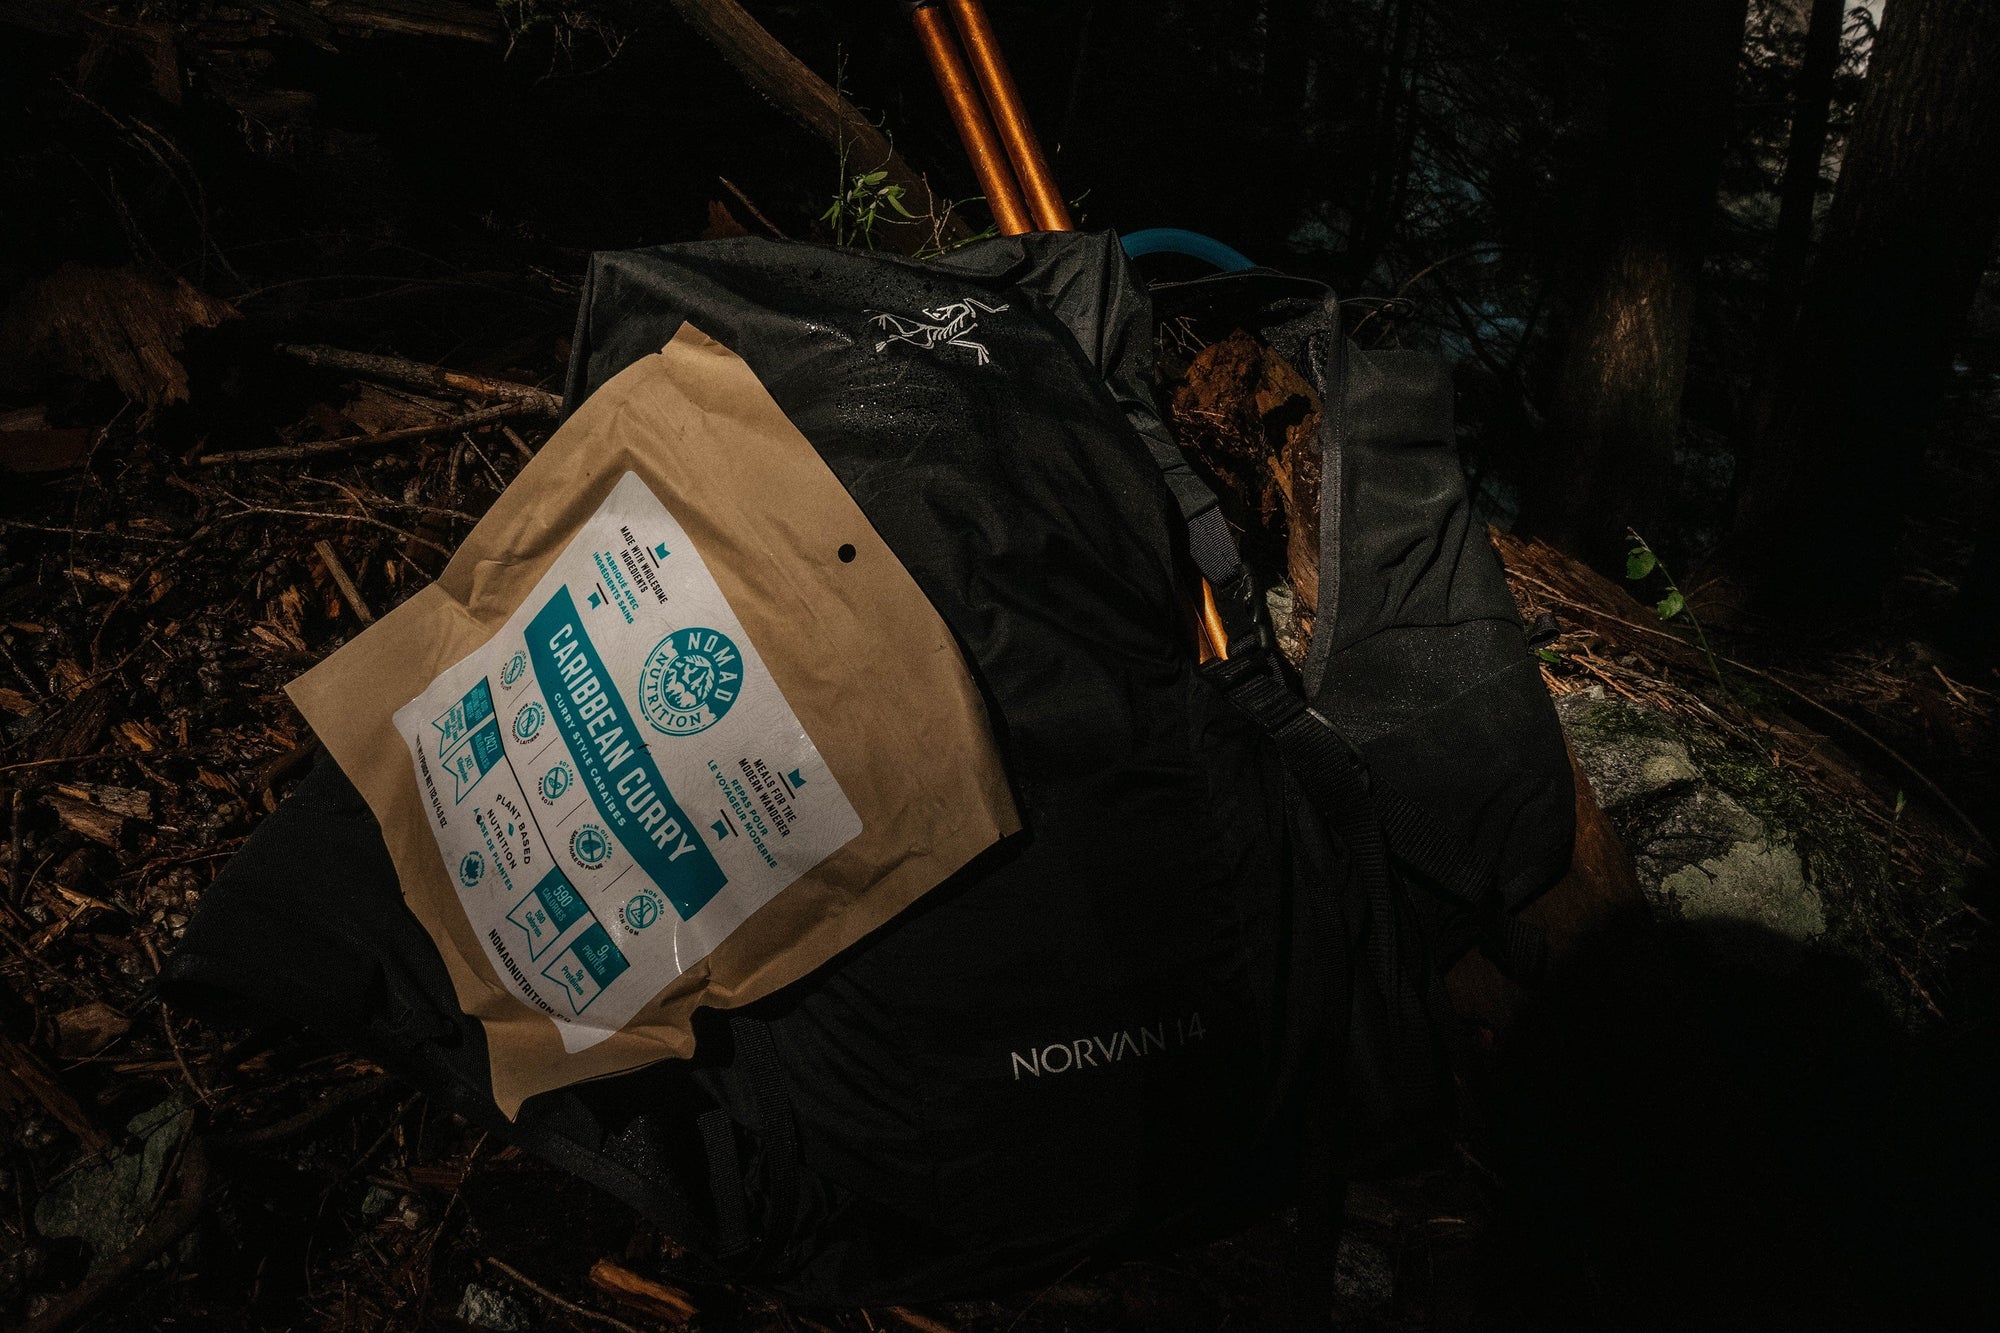 Nomad Nutrition Carribean Curry, vegan dehydrated, gluten-free, plant-based adventure meal pictured with bagpack and trekking poles for an outdoor hiking activity.